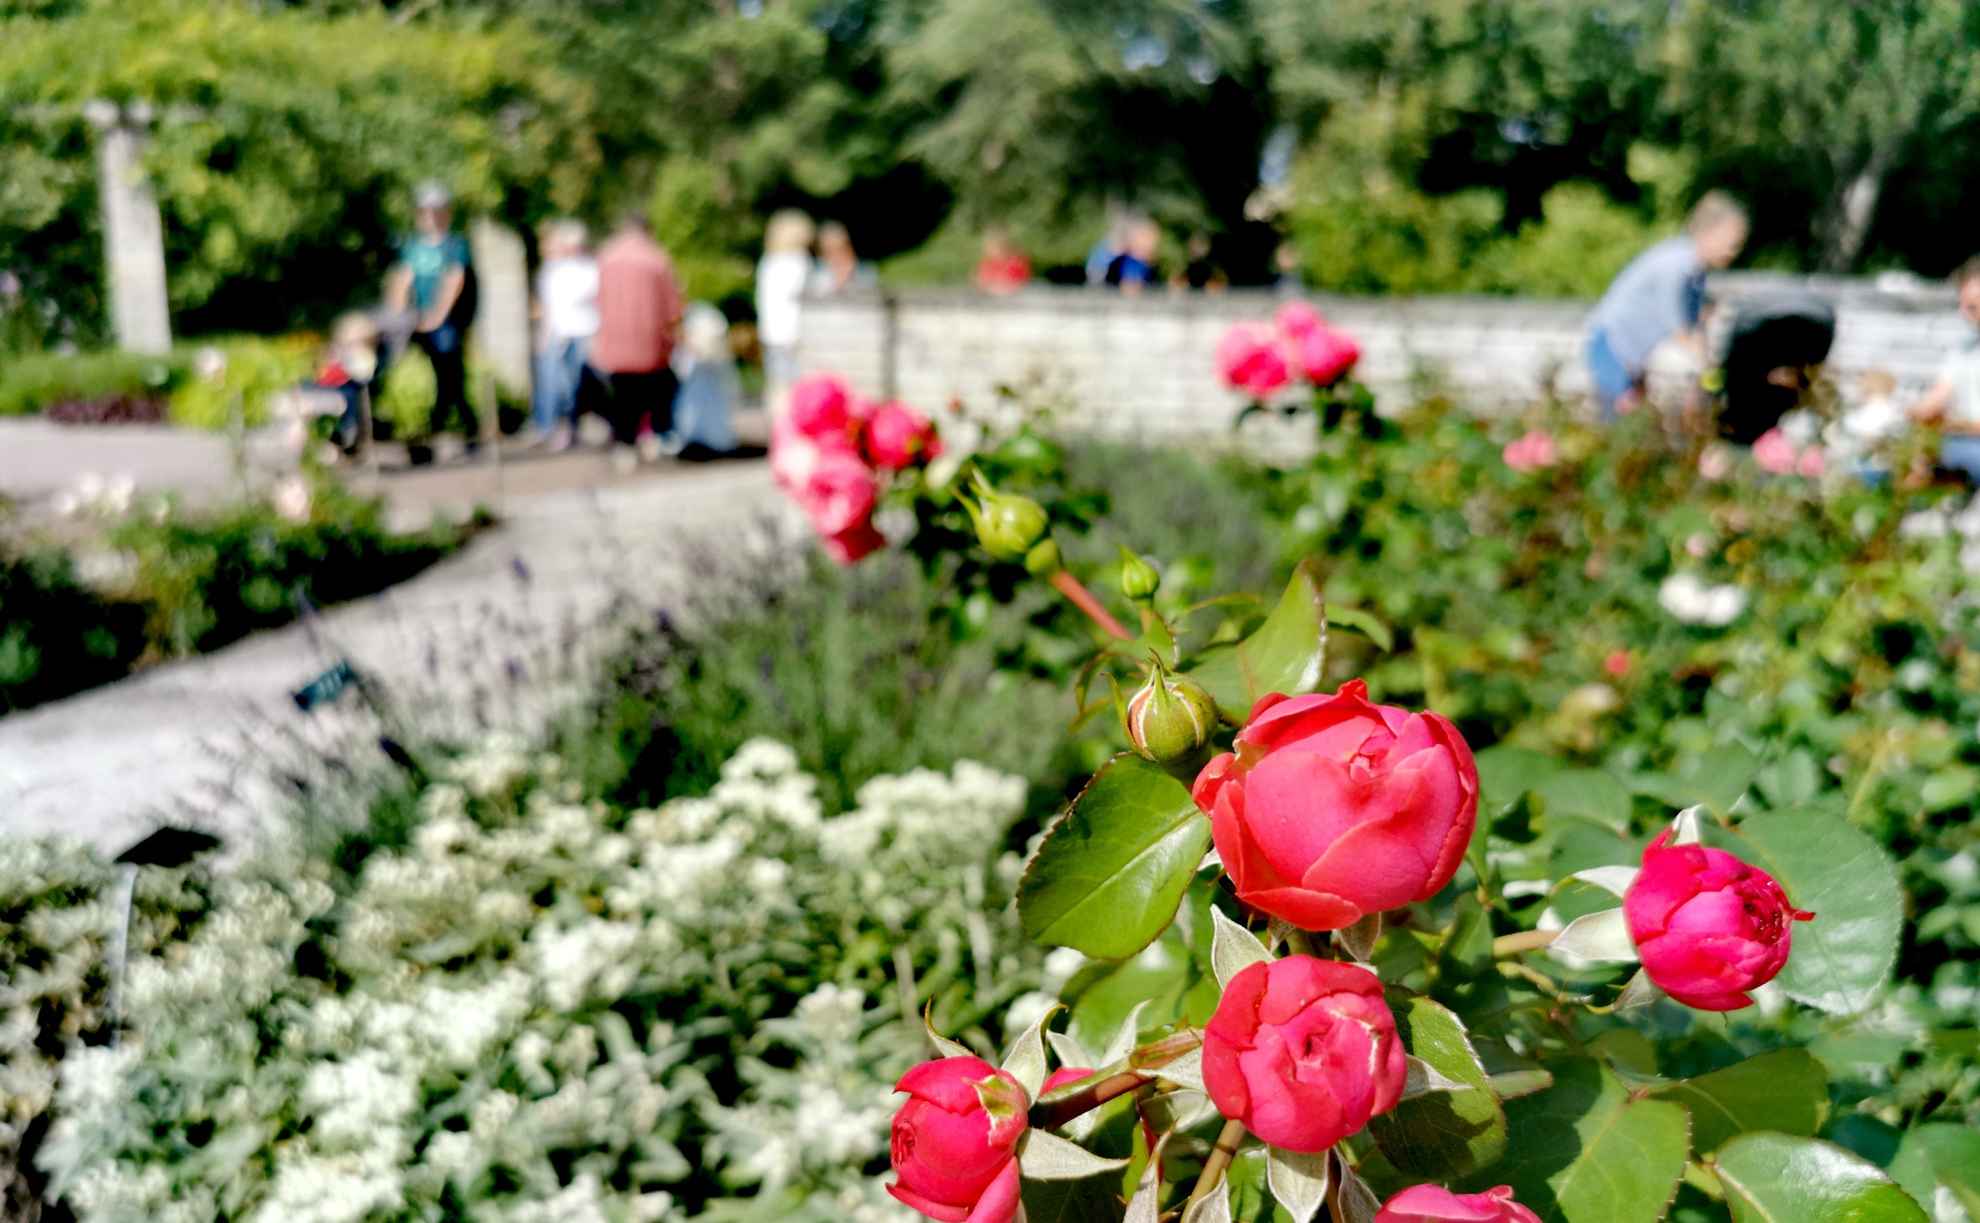 A rose bed at a botanical garden. In the background along a walking path there are greenery and some people are seen blurry.